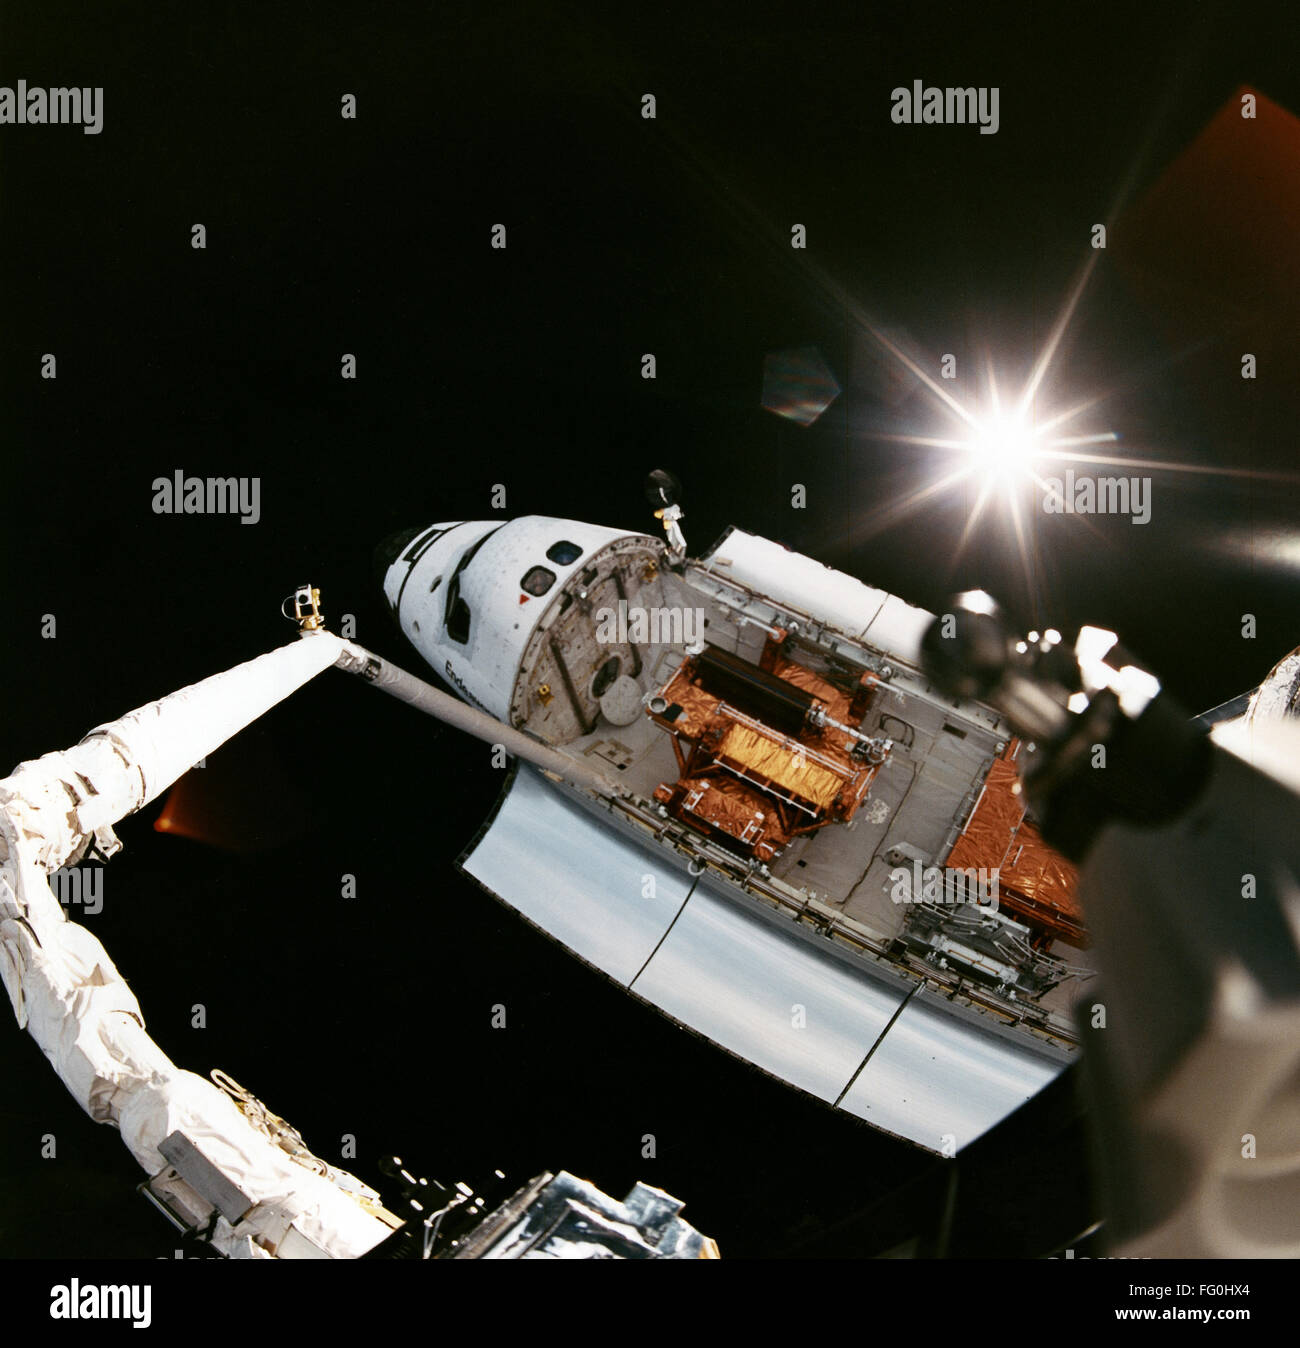 SPACE SHUTTLE, 1993. /nA view of the Space Shuttle Endeavour in orbit. Photograph, 1993. Stock Photo